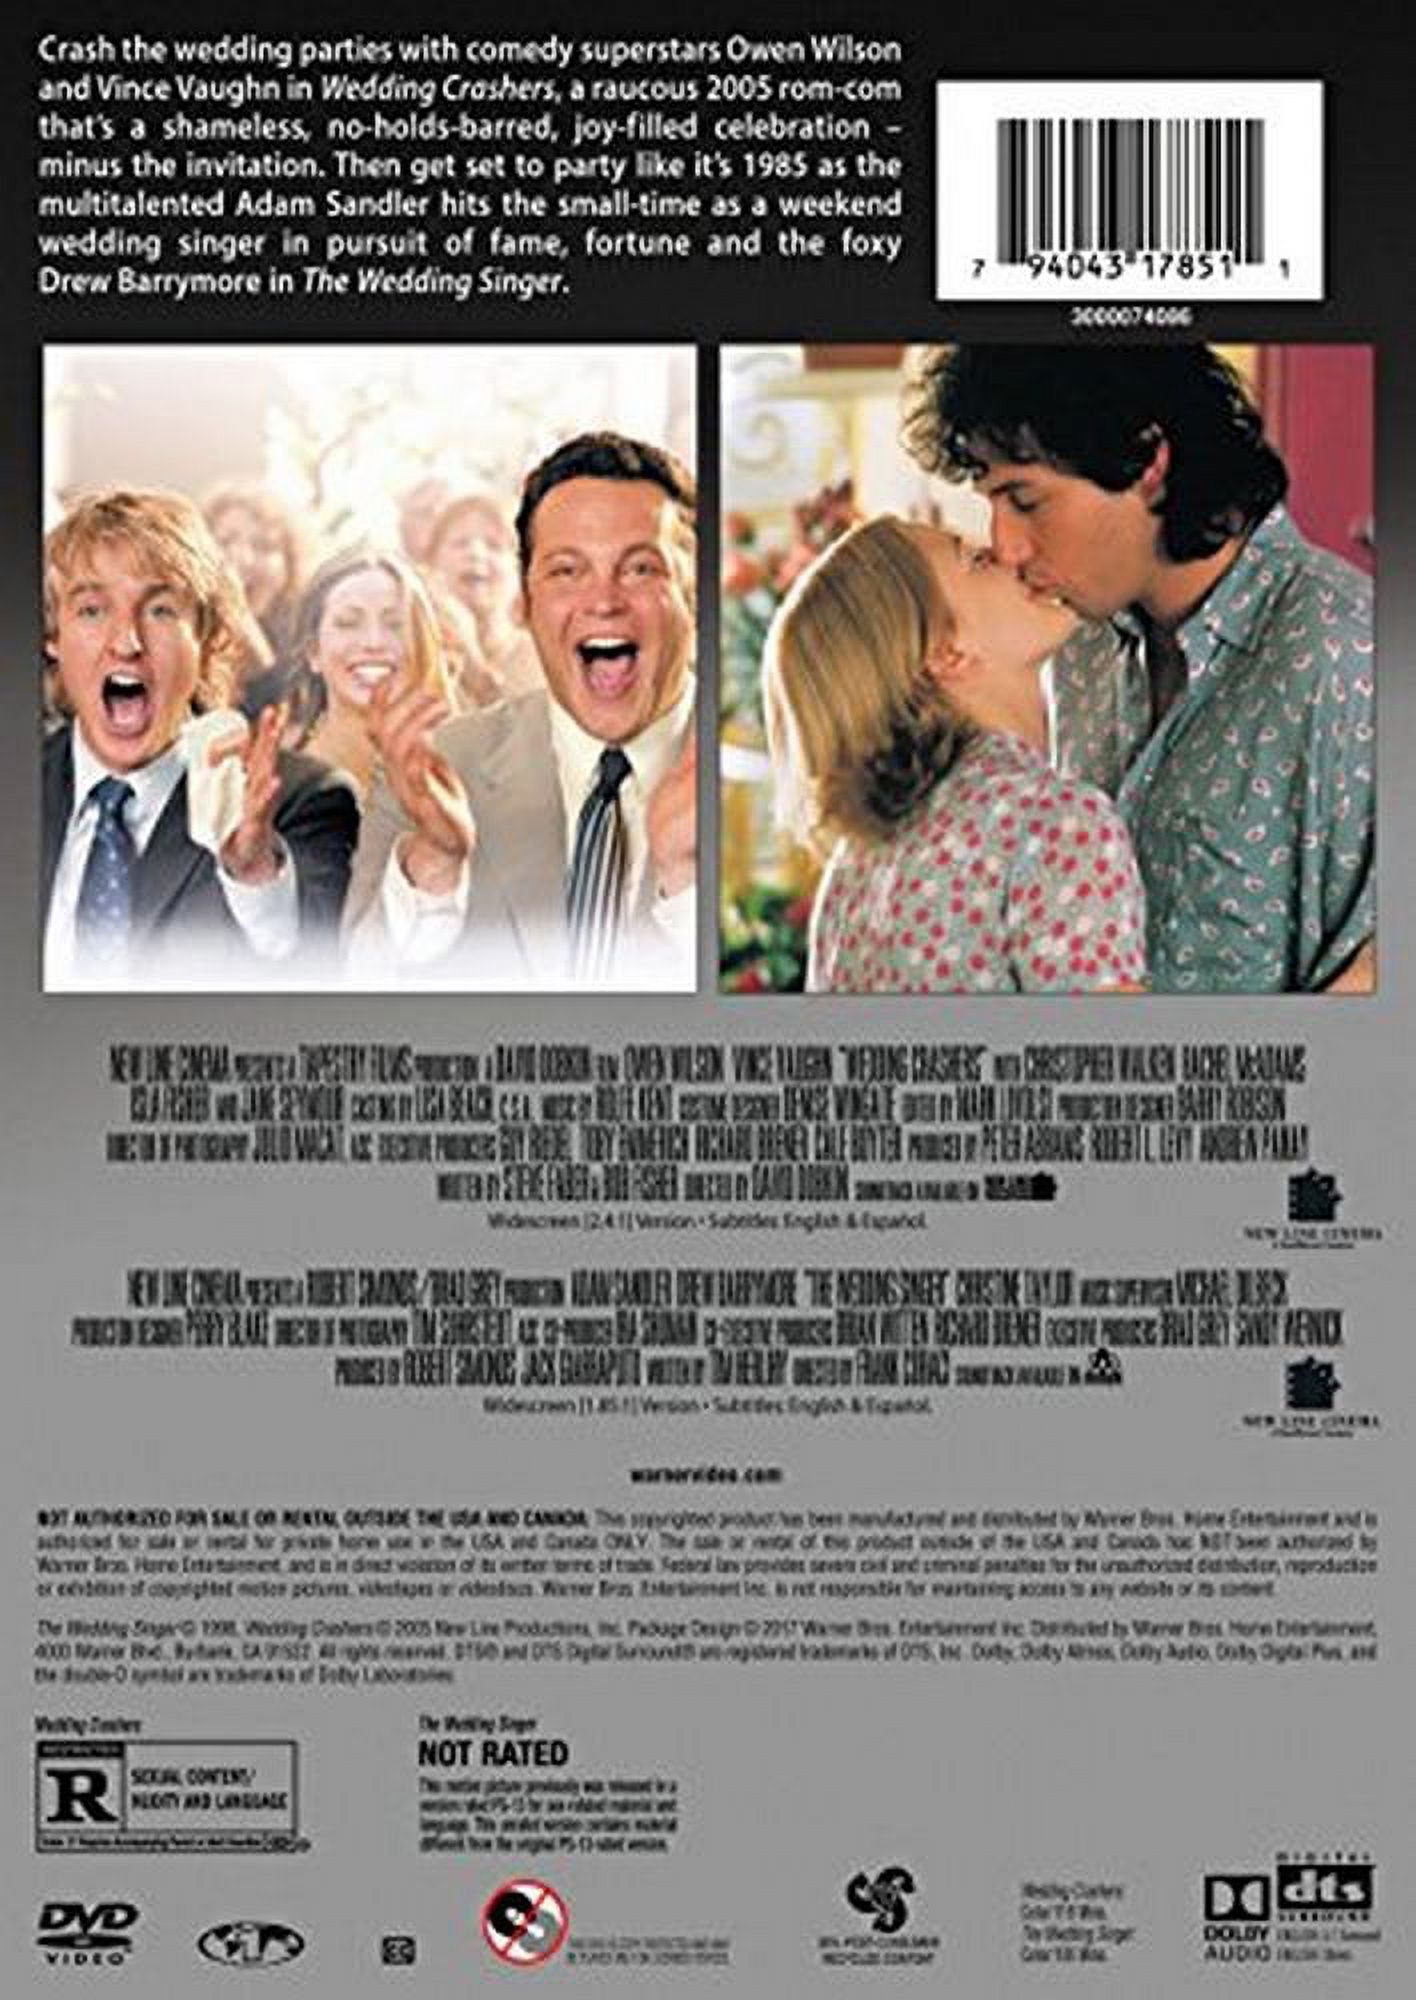 The Wedding Singer / Wedding Crashers (DVD), New Line Home Video, Comedy - image 2 of 2